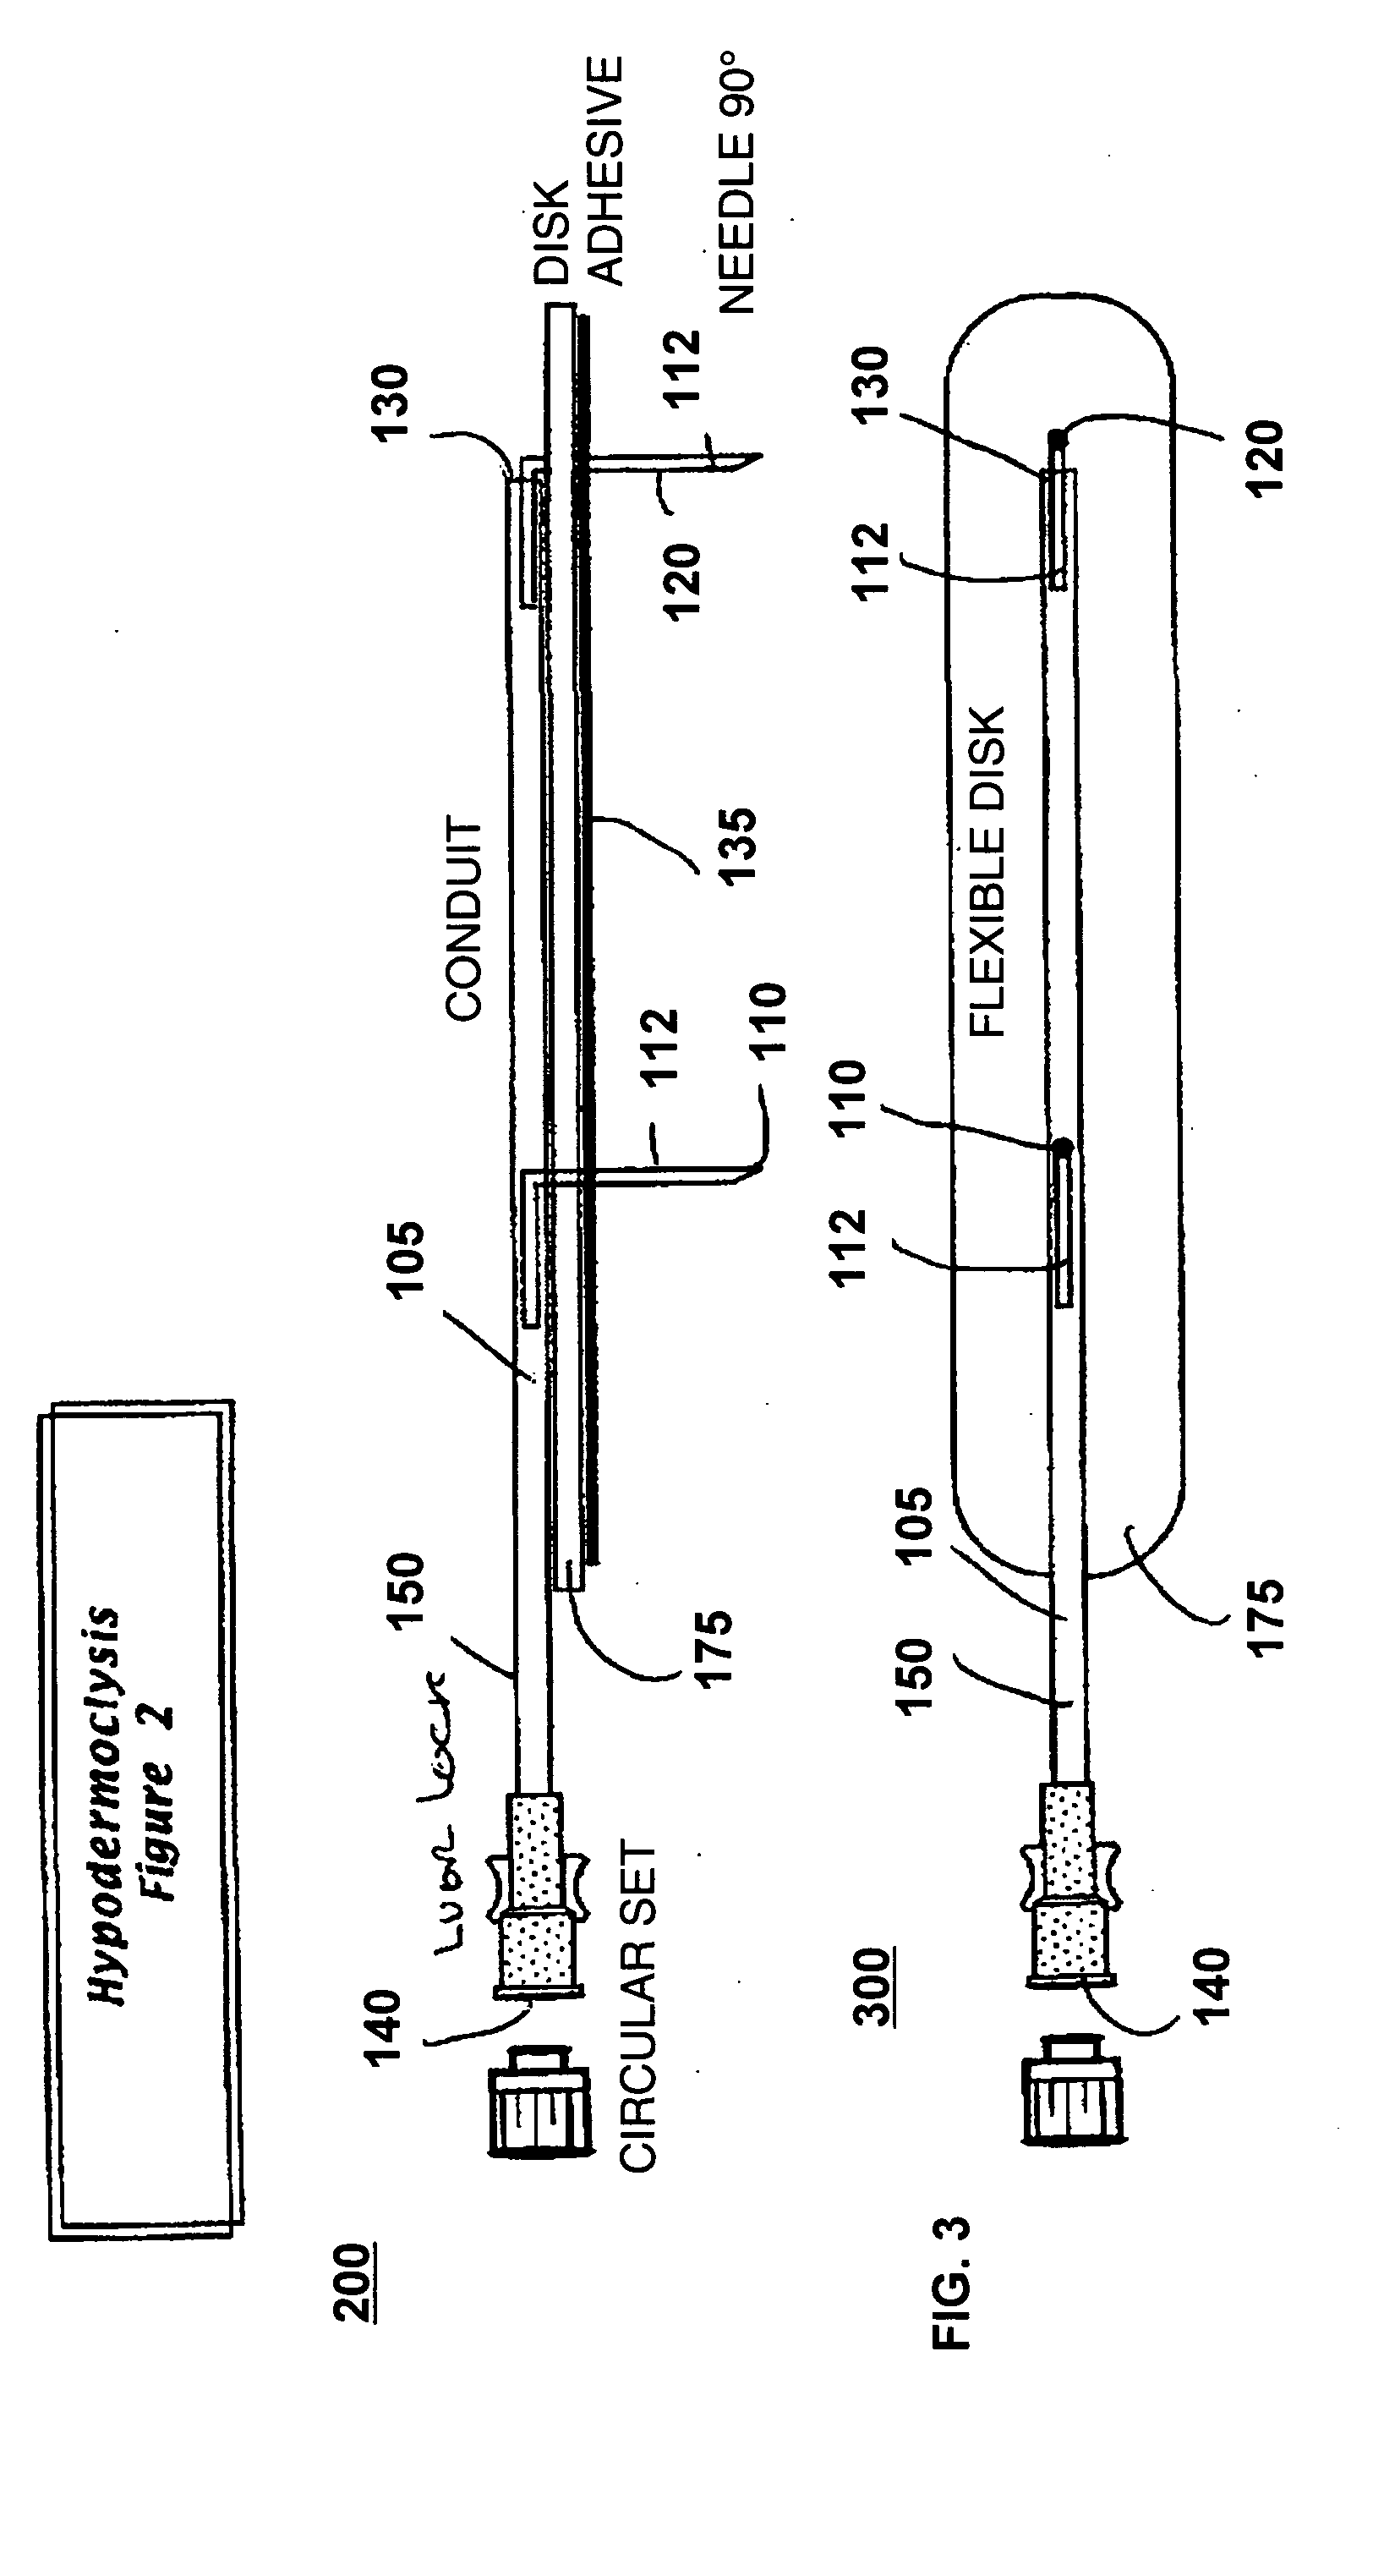 Device for subcutaneous infusion of fluids